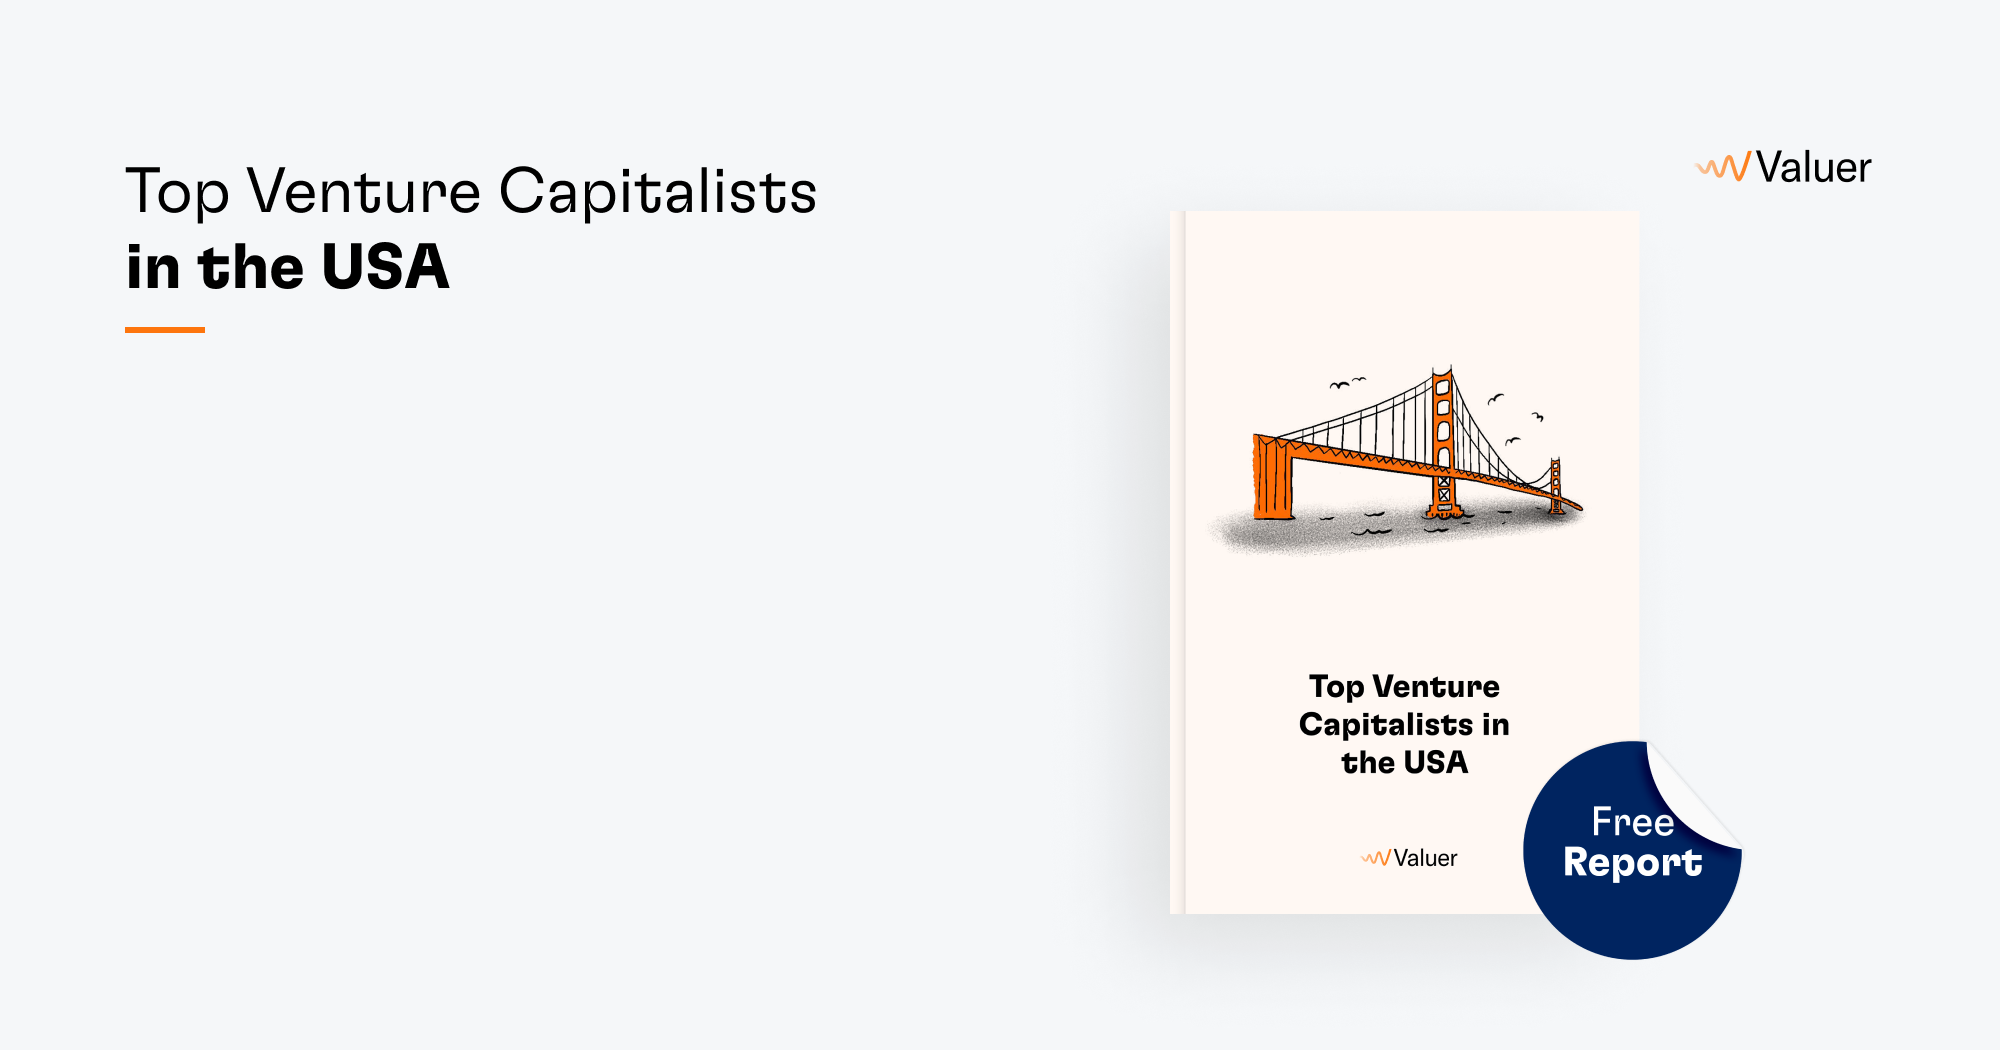 100 Top Venture Capitalists in the USA (free ebook)